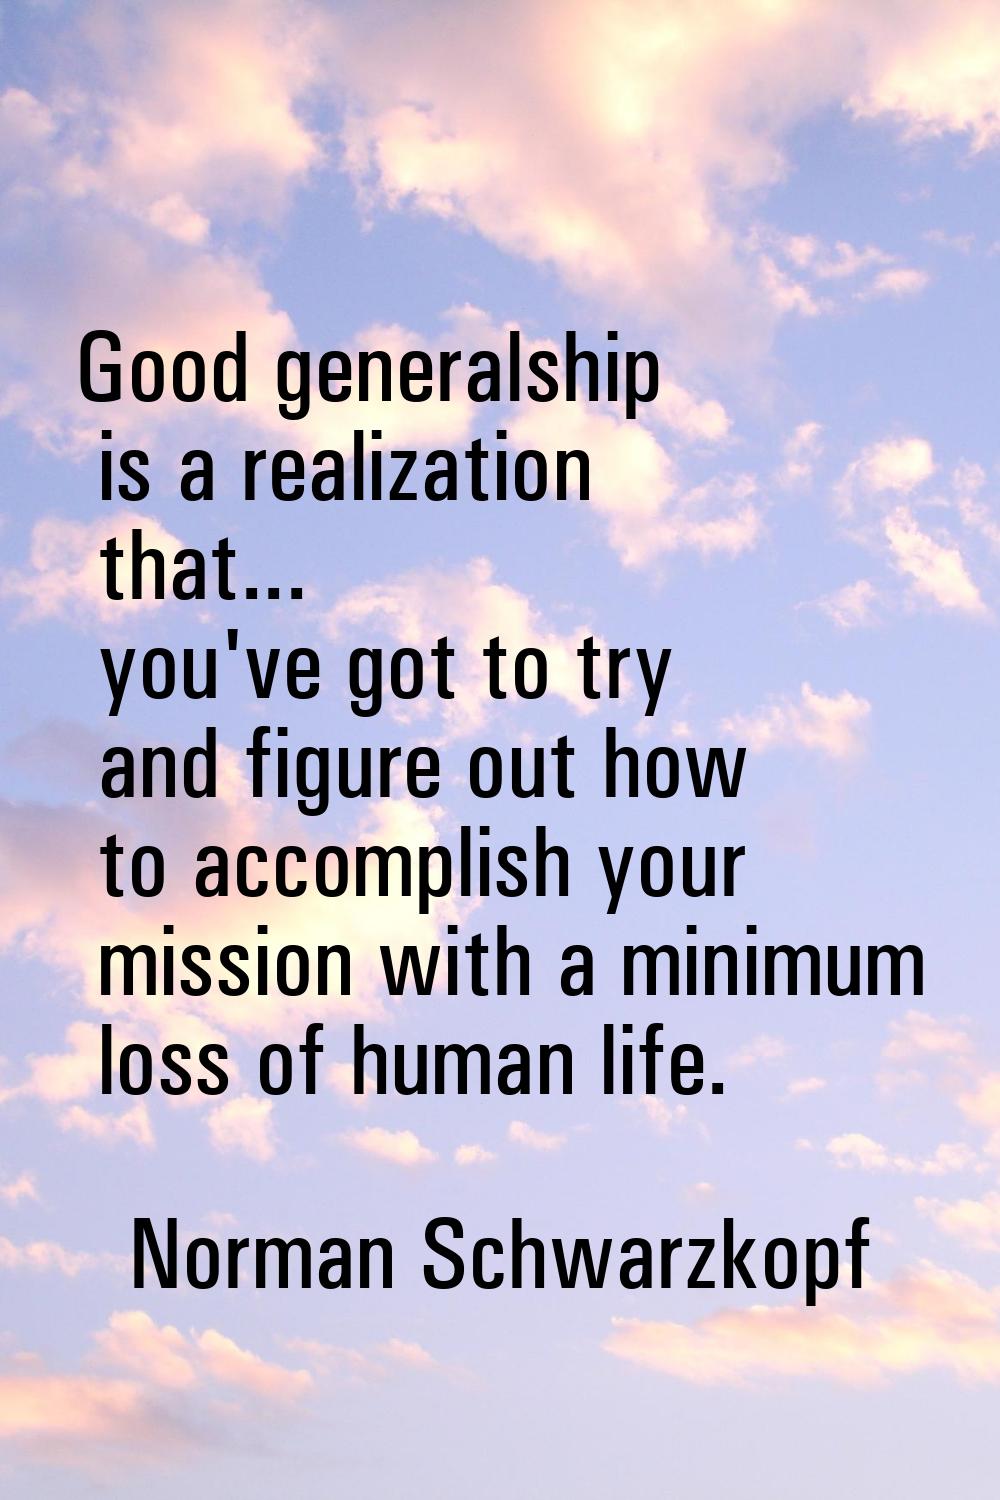 Good generalship is a realization that... you've got to try and figure out how to accomplish your m